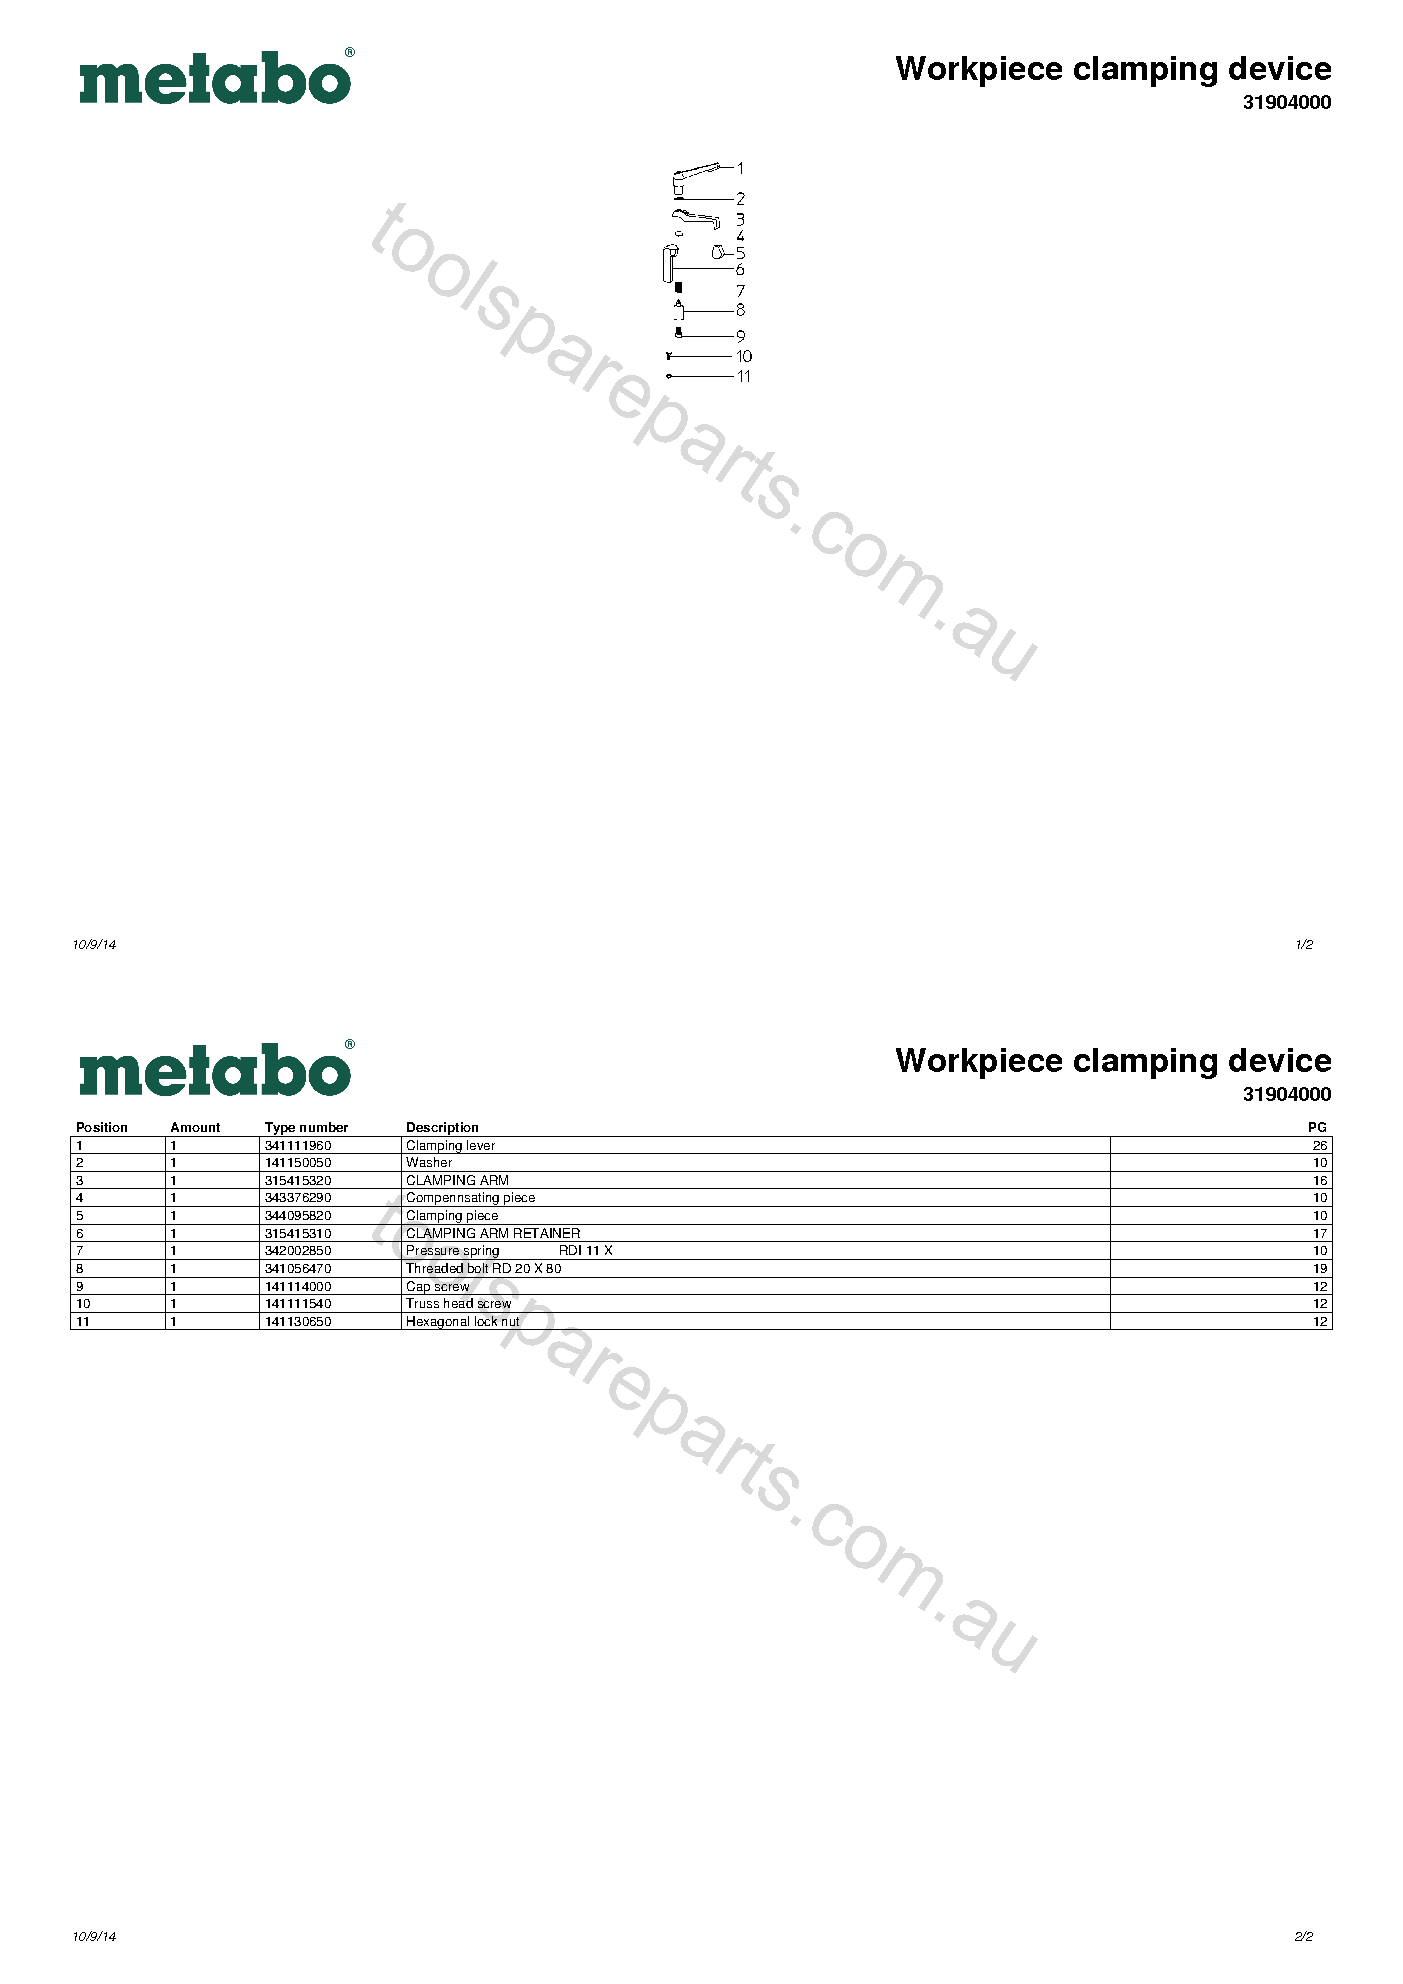 Metabo Workpiece clamping device 31904000  Diagram 1